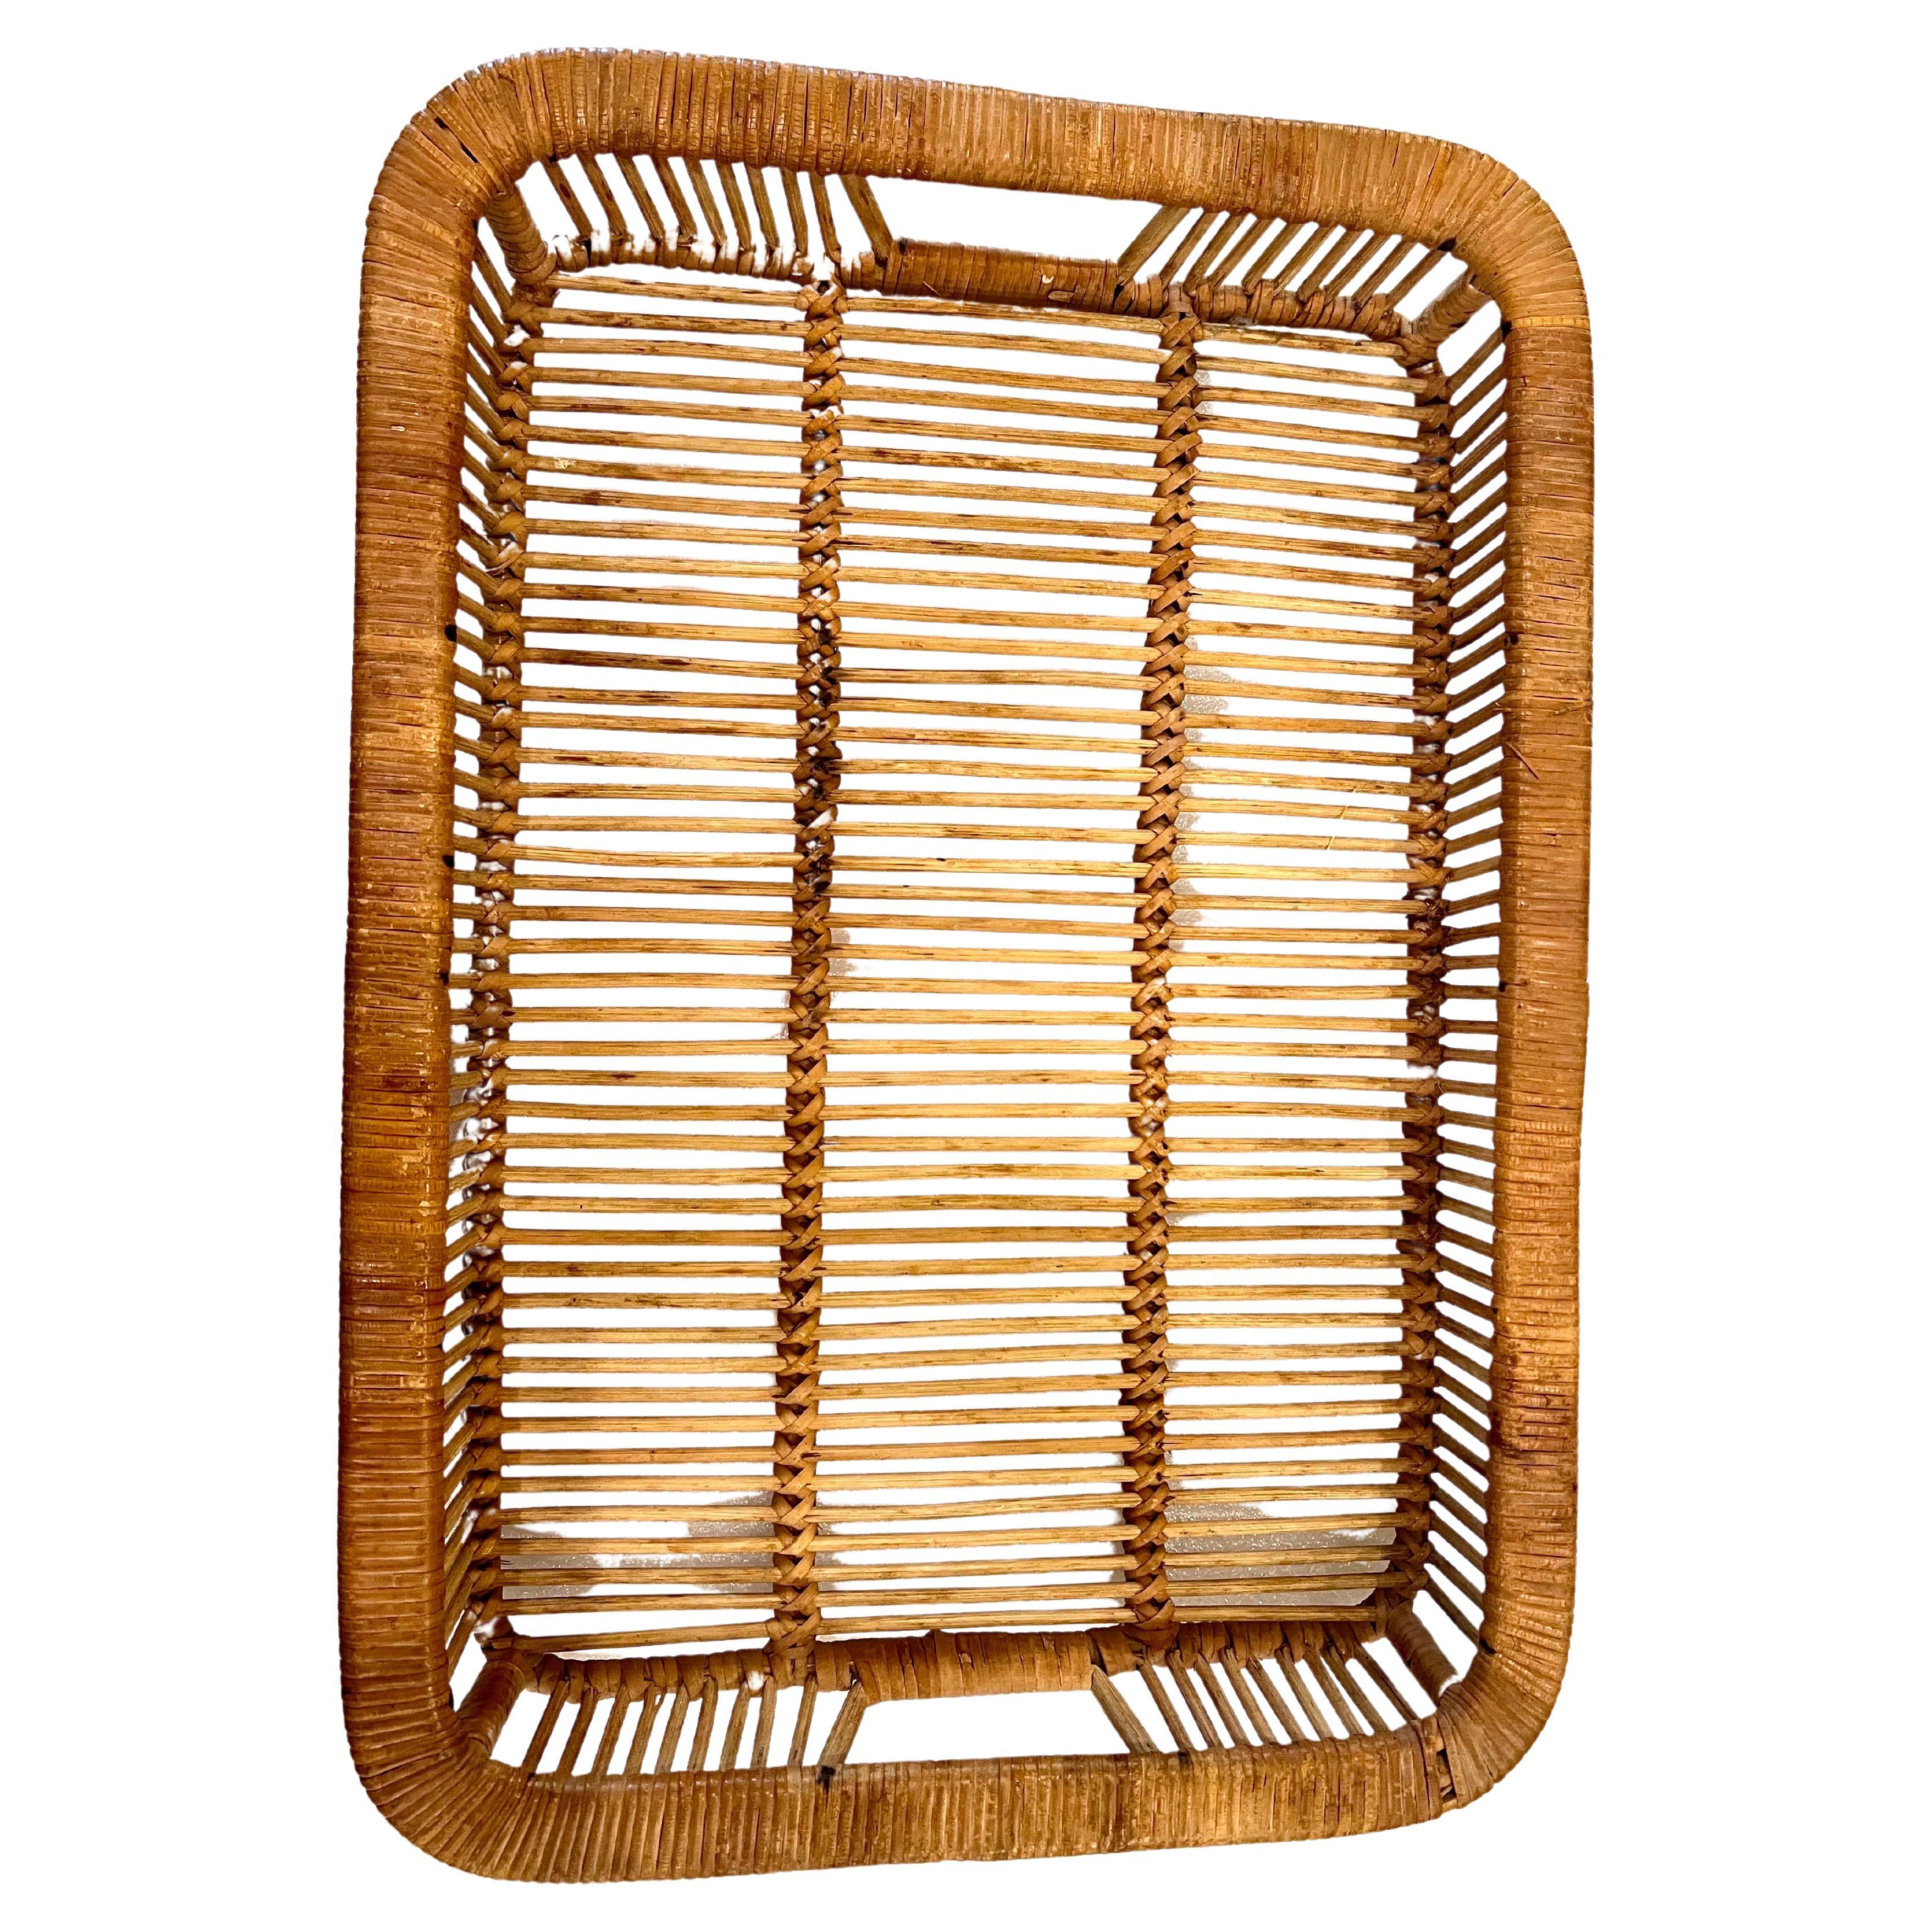 Danish Modern Rattan tray was designed and made by Artek in Finland during the 1960s. Hand woven from cane and rattan. Good vintage condition with signs of age-related wear and patina.

these beautifully crafted trays were designed, produced, and